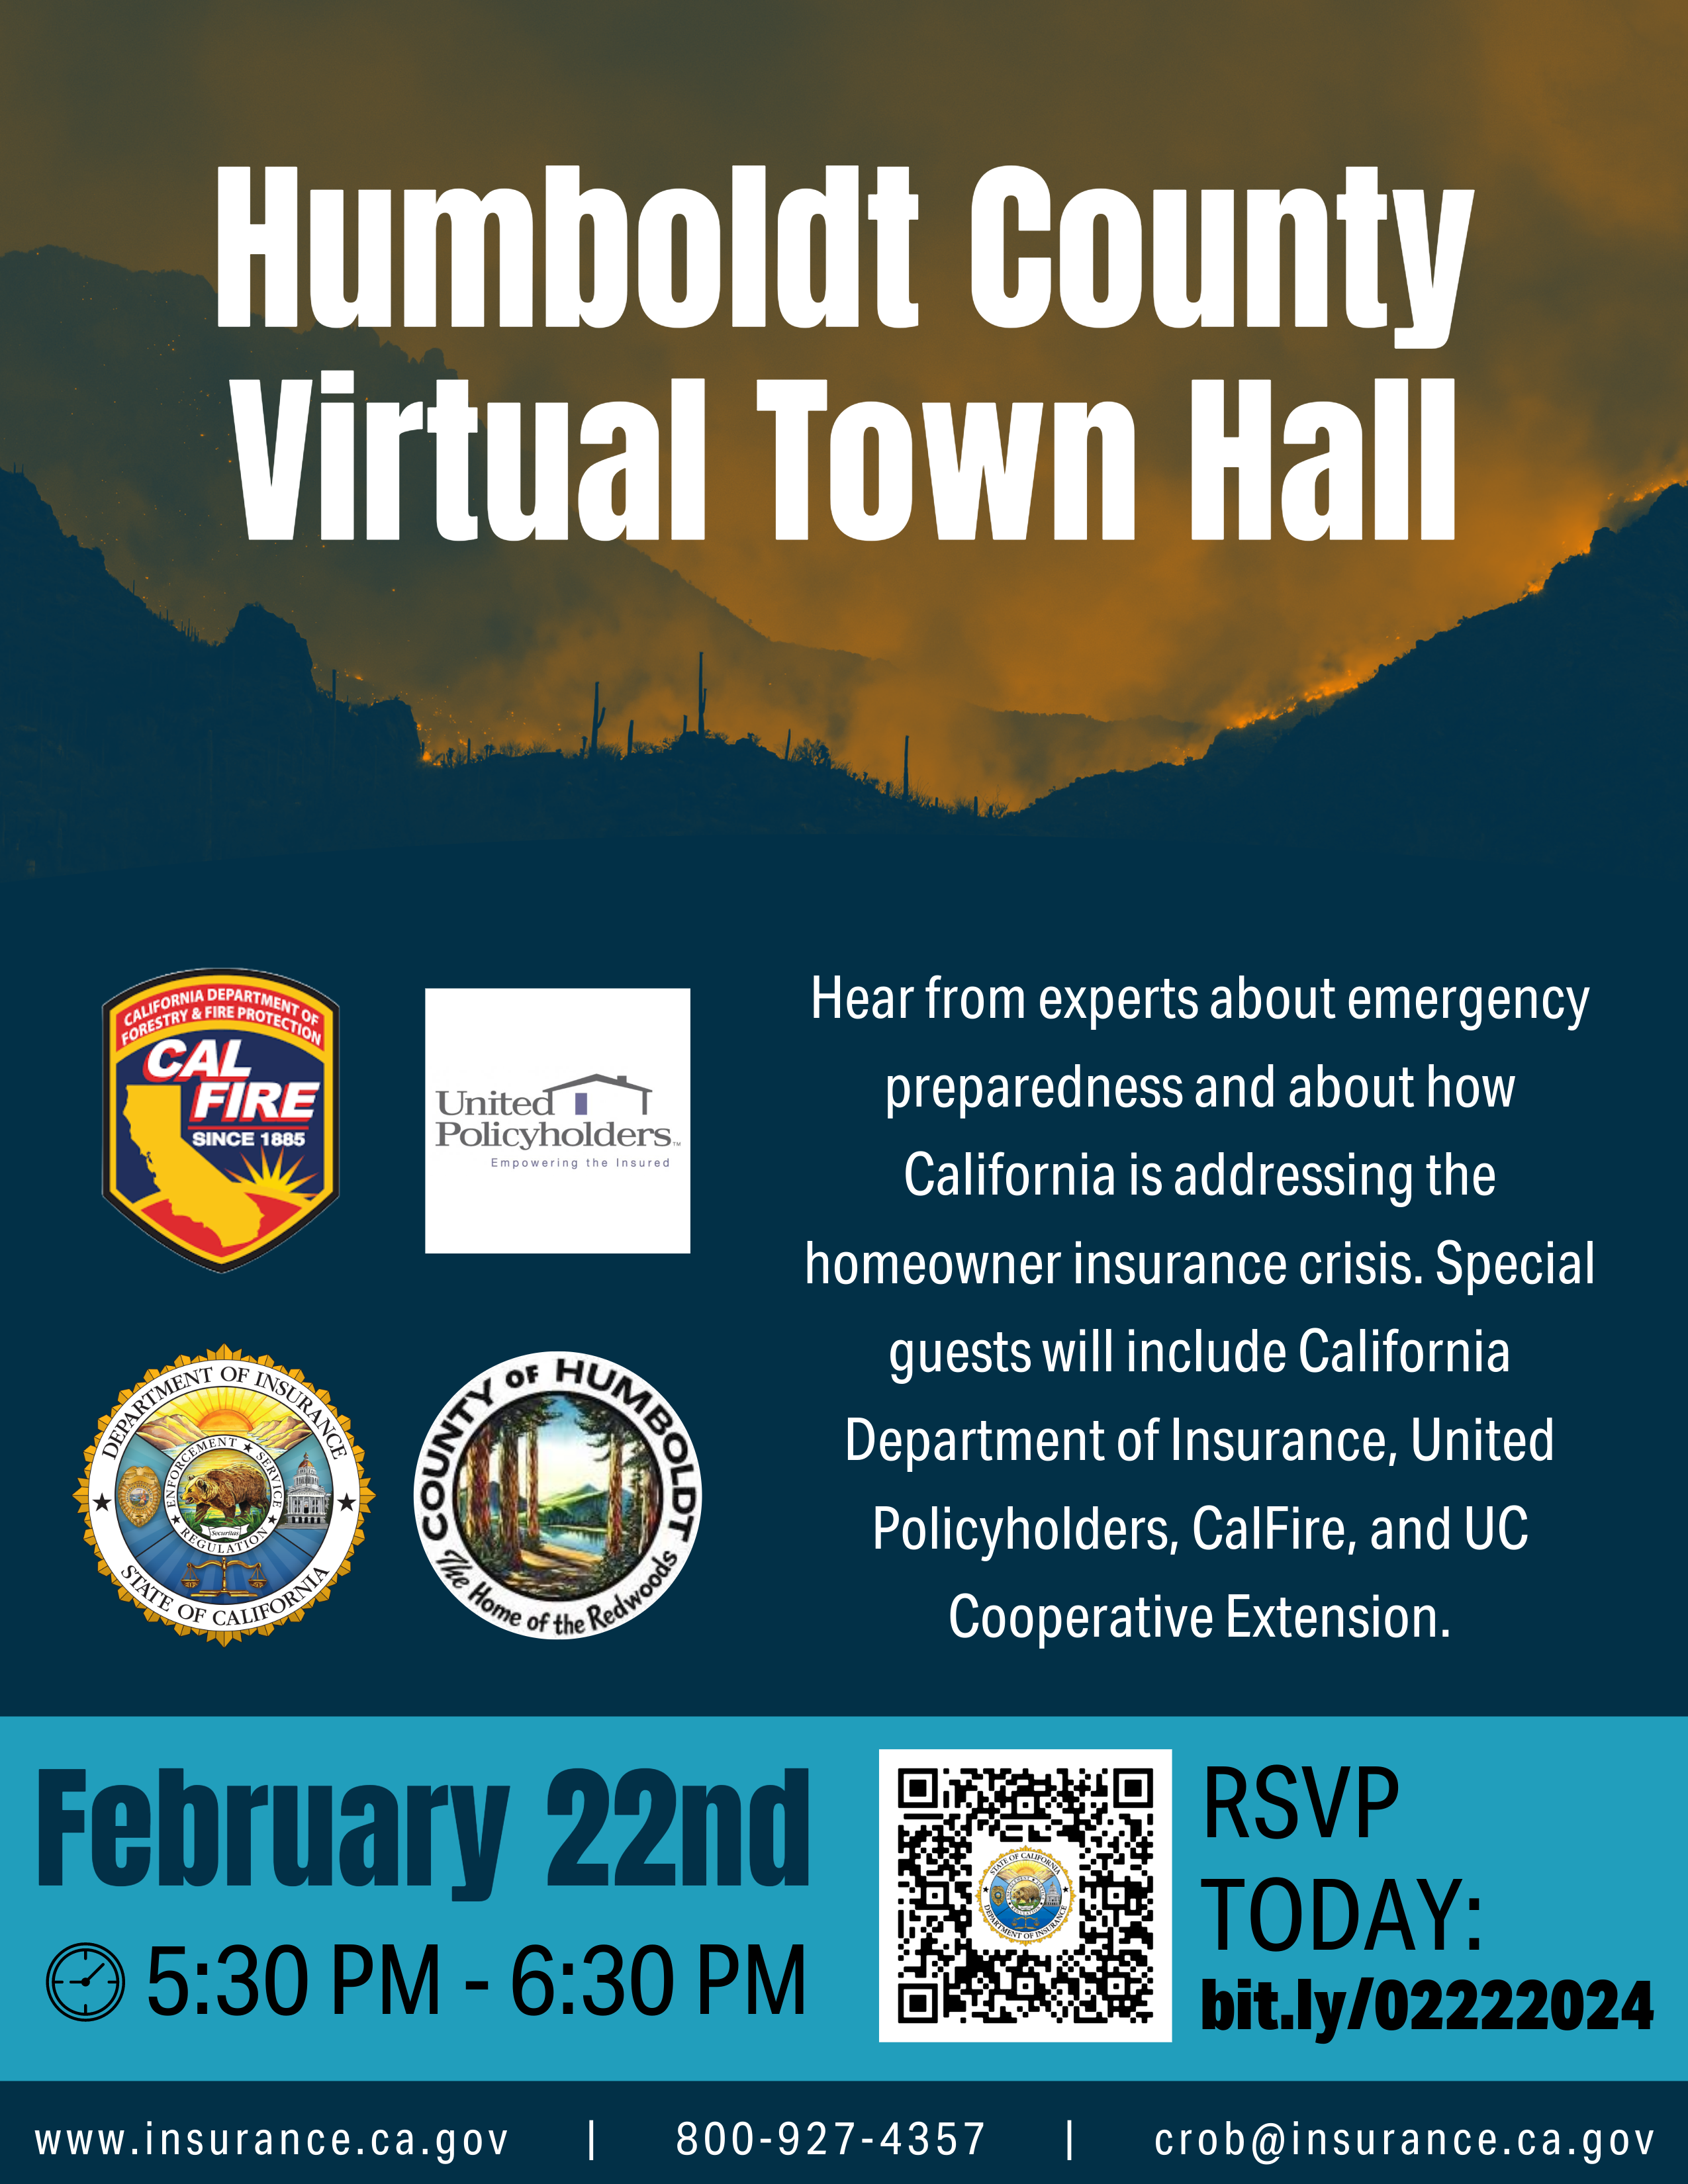 Hear from experts about emergency preparedness and about how California is addressing the homeowner insurance crisis. Special guests will include California Department of Insurance, United Policyholders, CalFire, and UC Cooperative Extension.